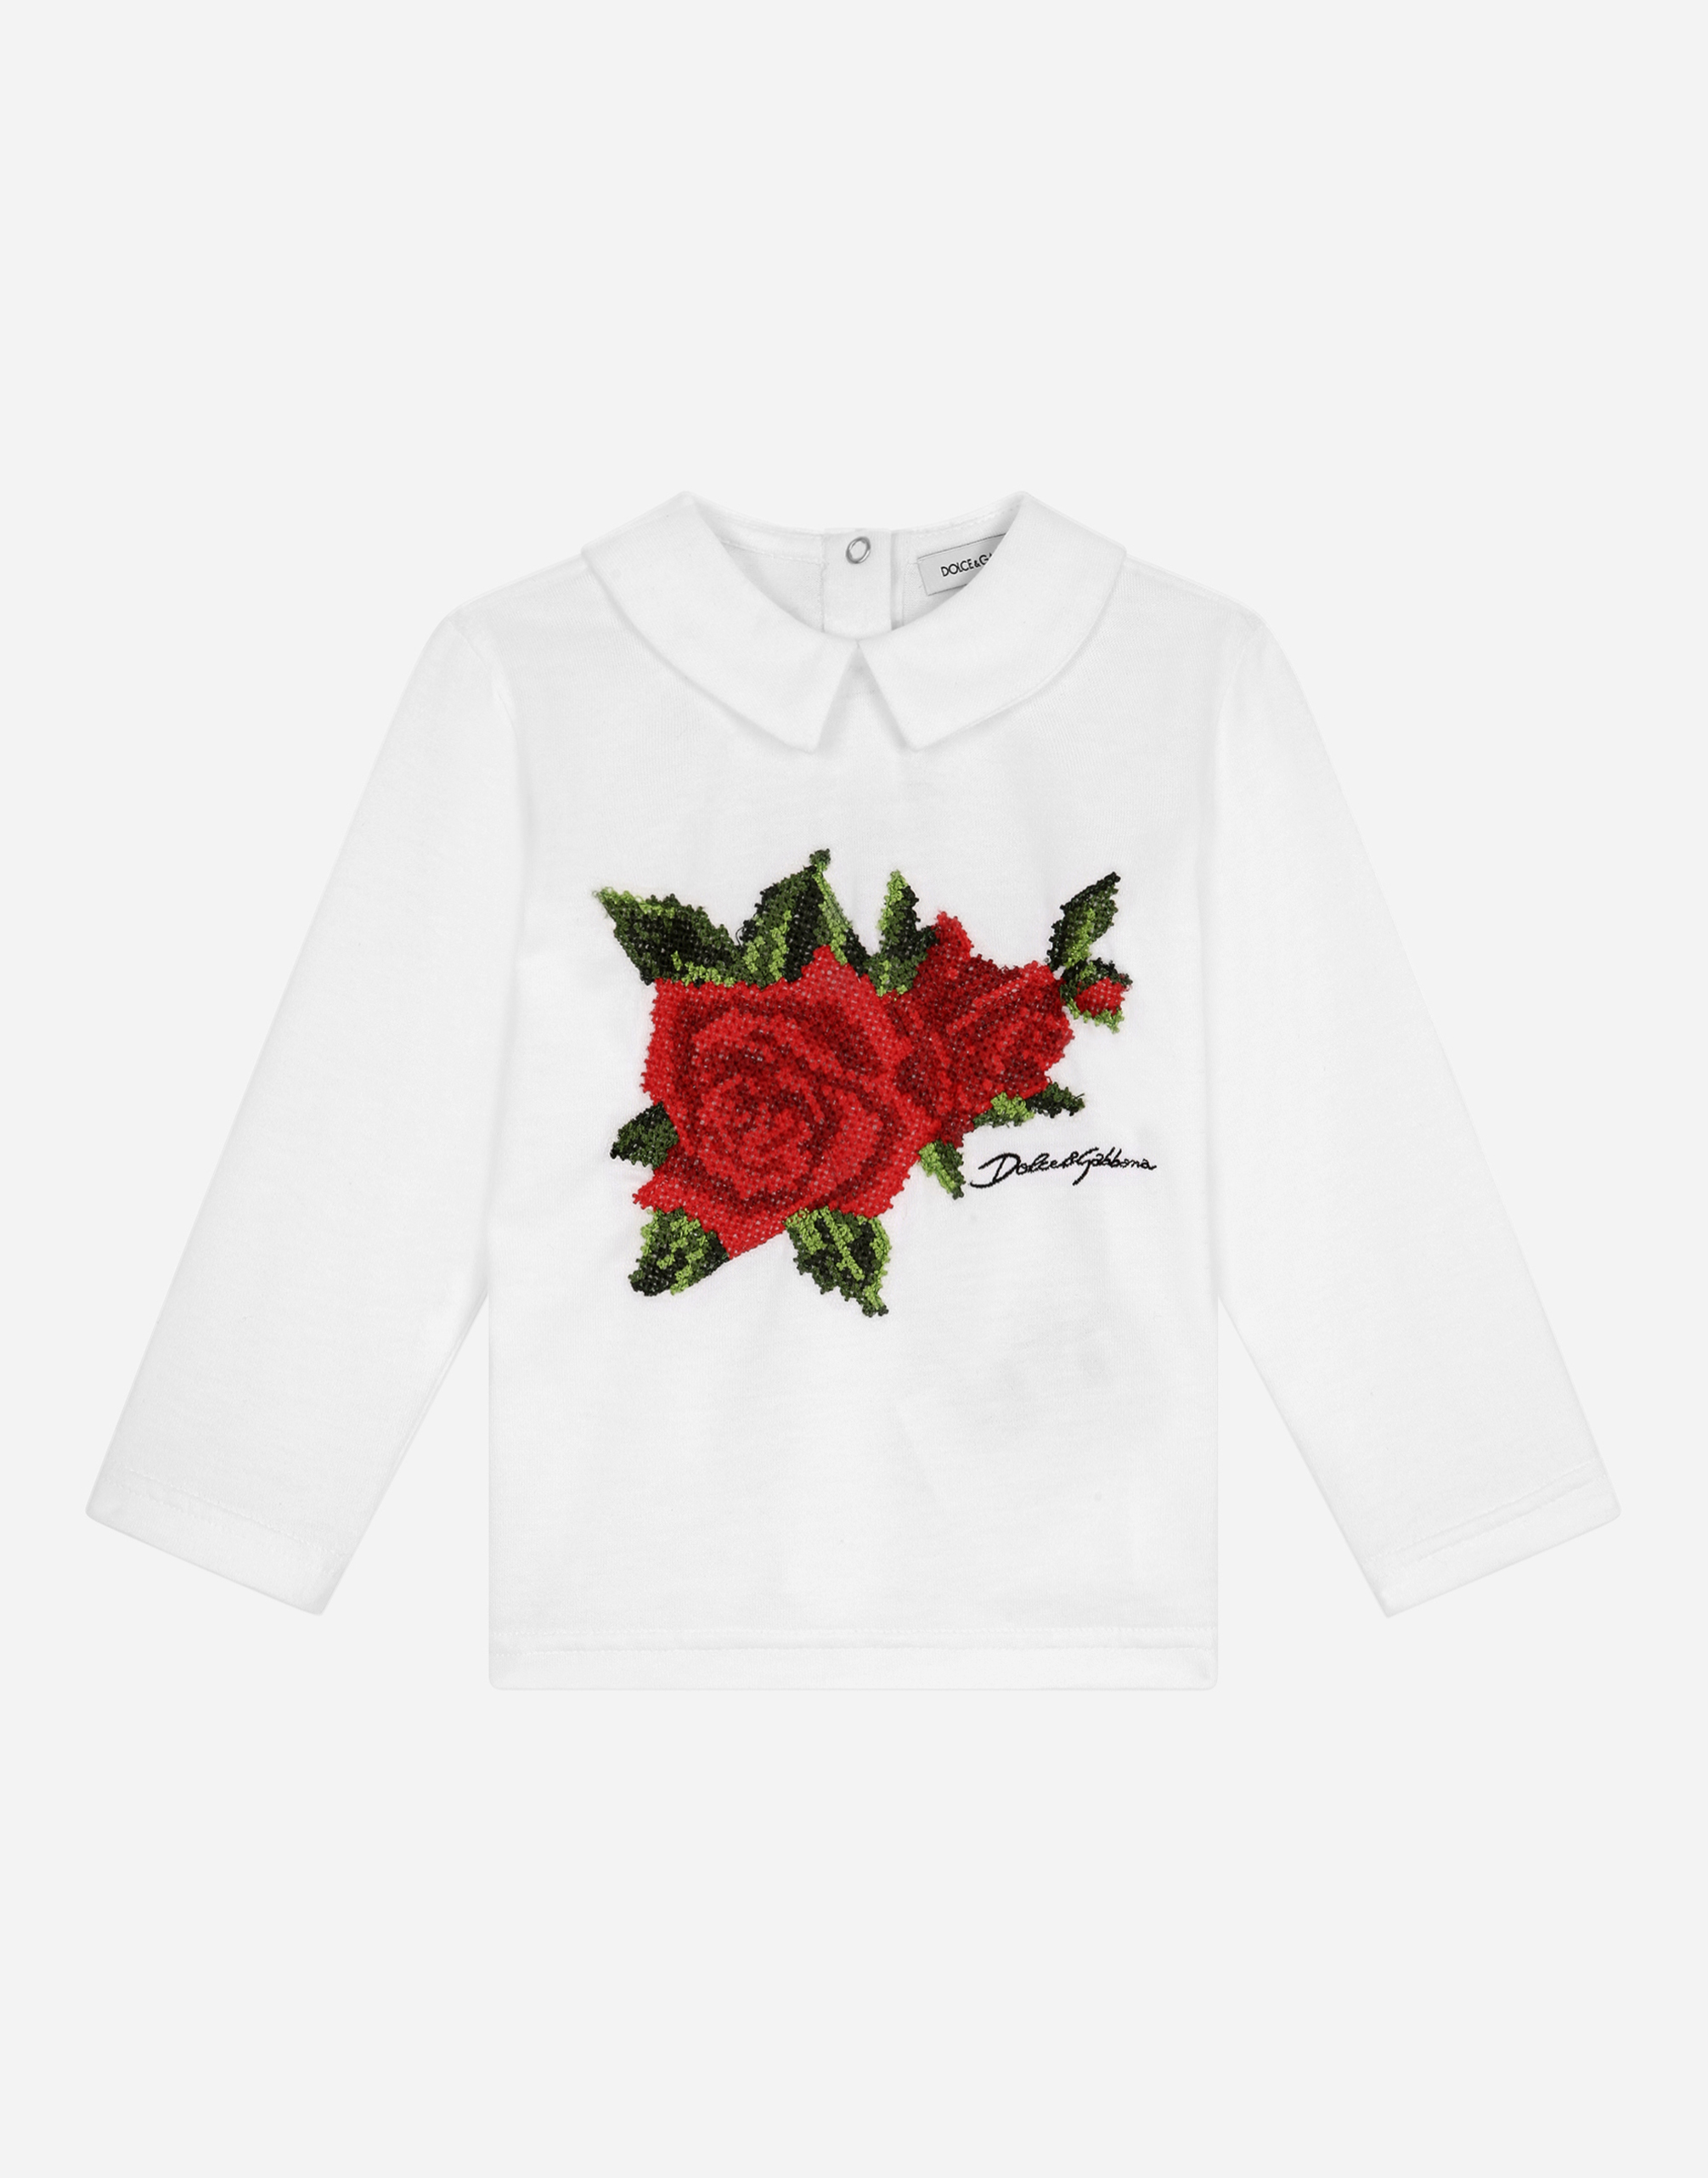 Dolce & Gabbana Babies' Jersey Polo Shirt With Crochet Rose Patch